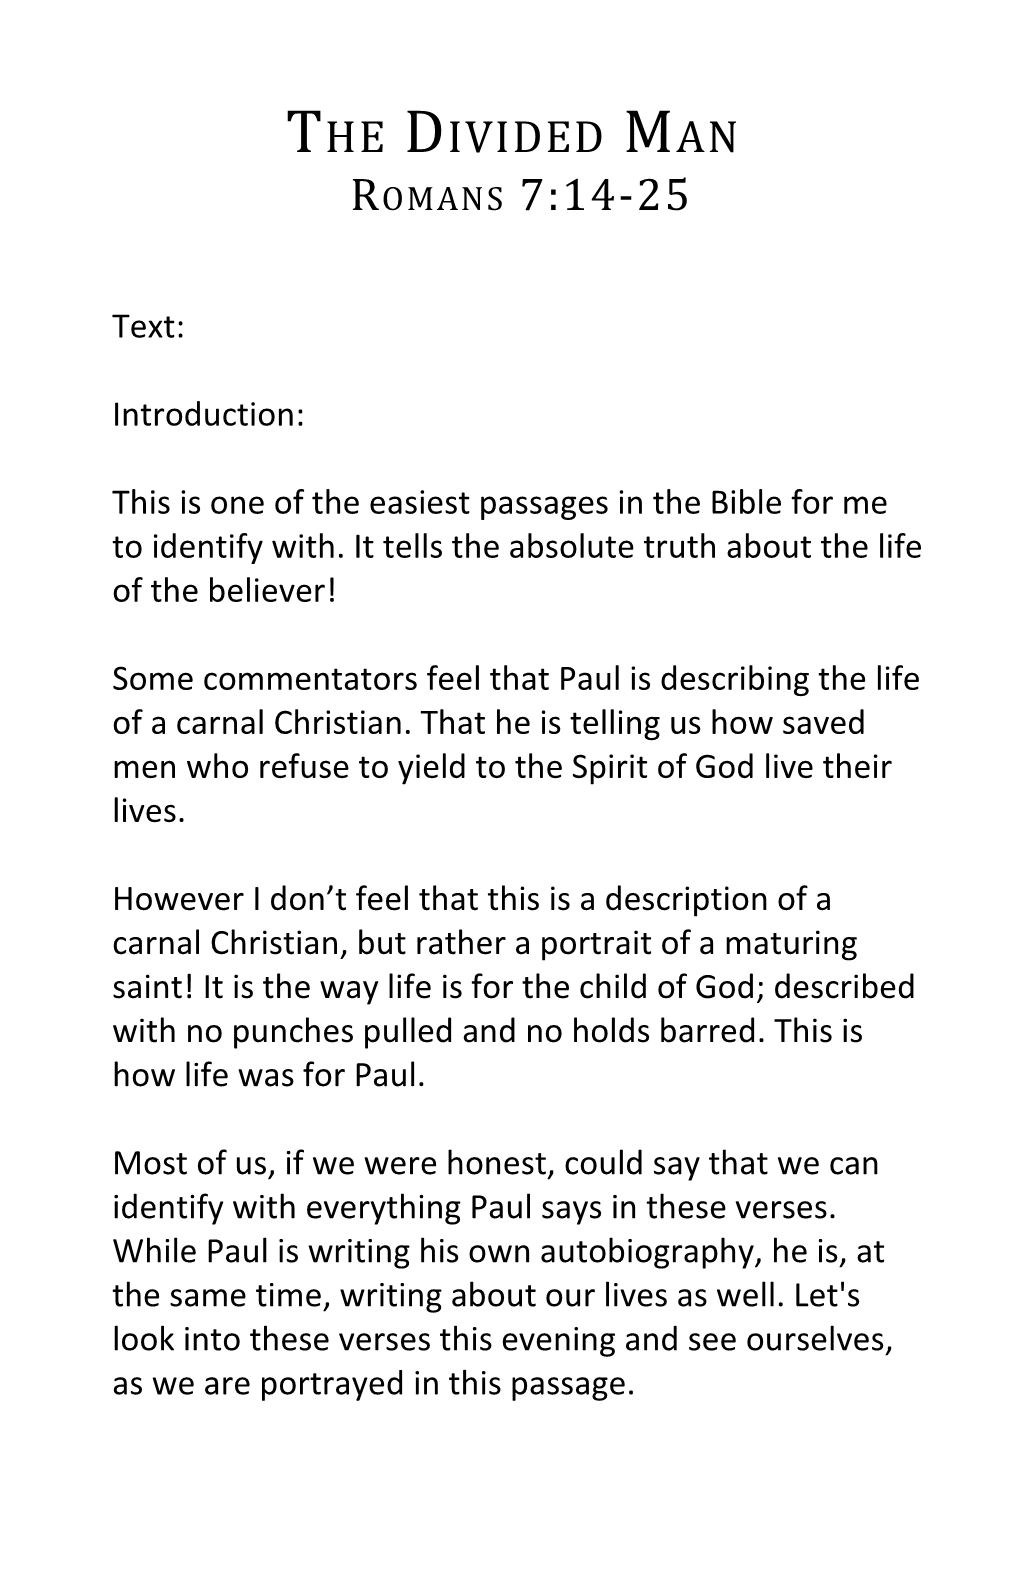 1. Paul States the Facts (Vs. 14)